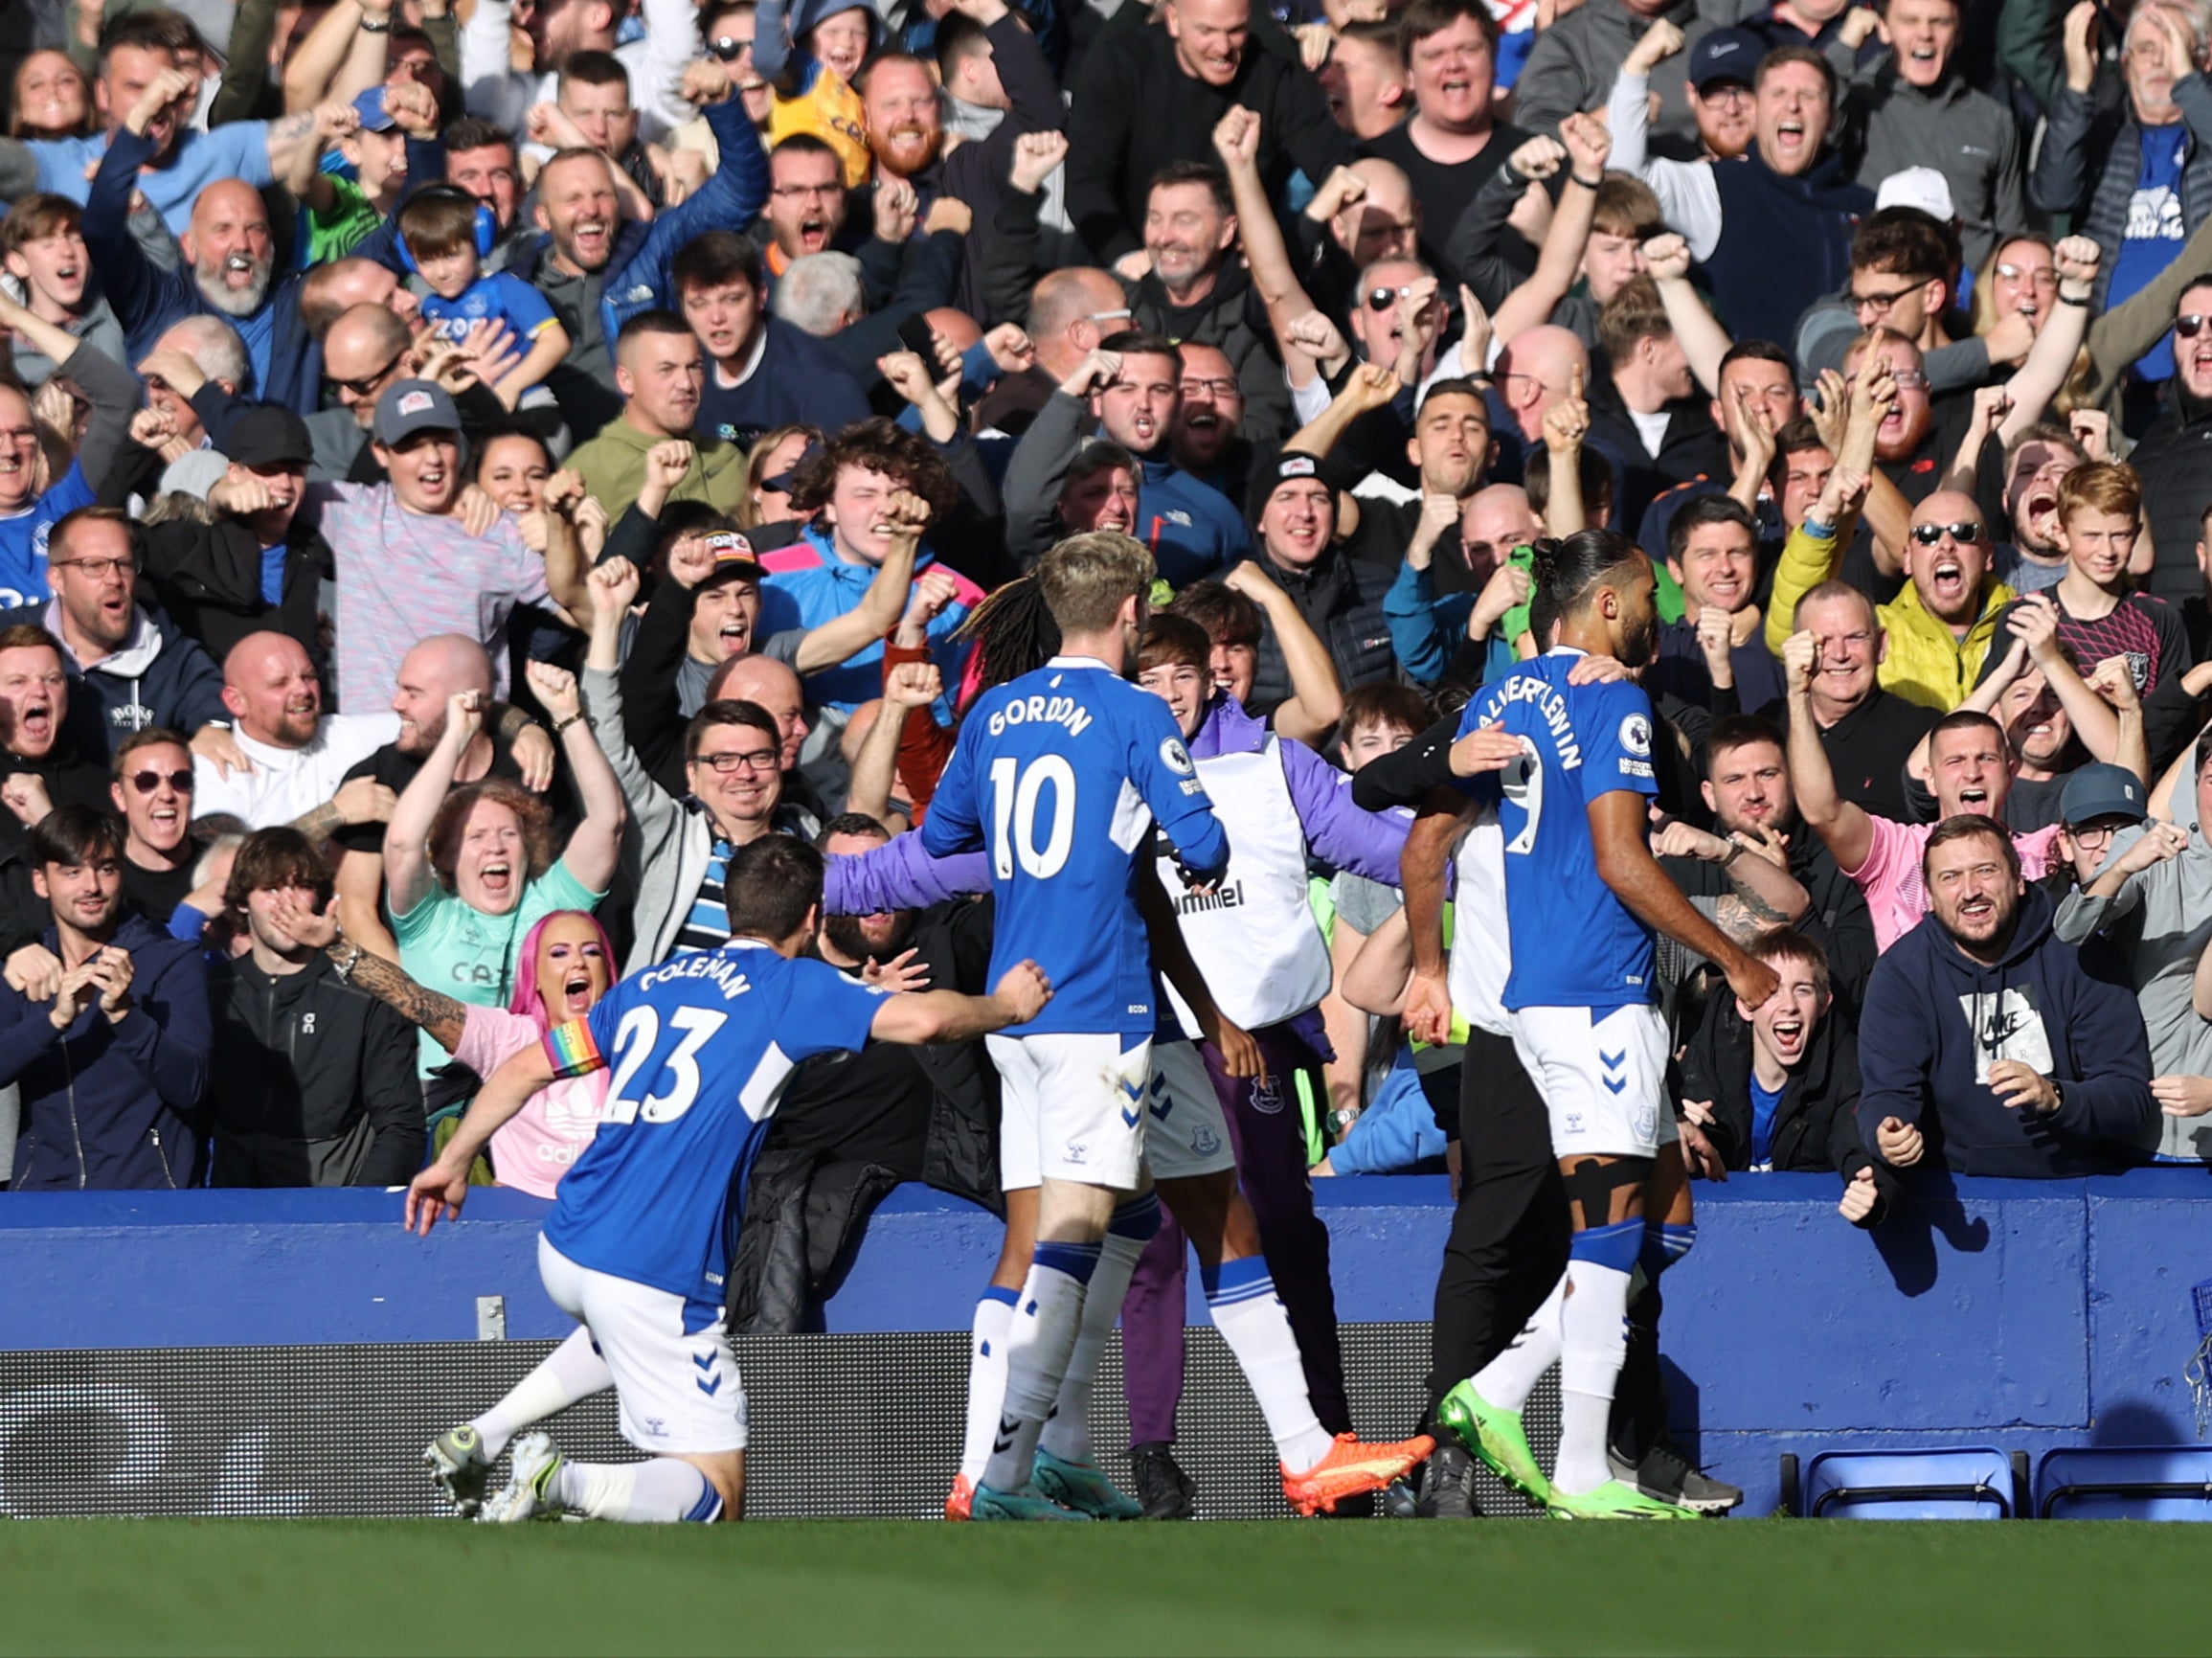 Dominic Calvert-Lewin celebrates scoring Everton’s opener in a 3-0 win over Crystal Palace